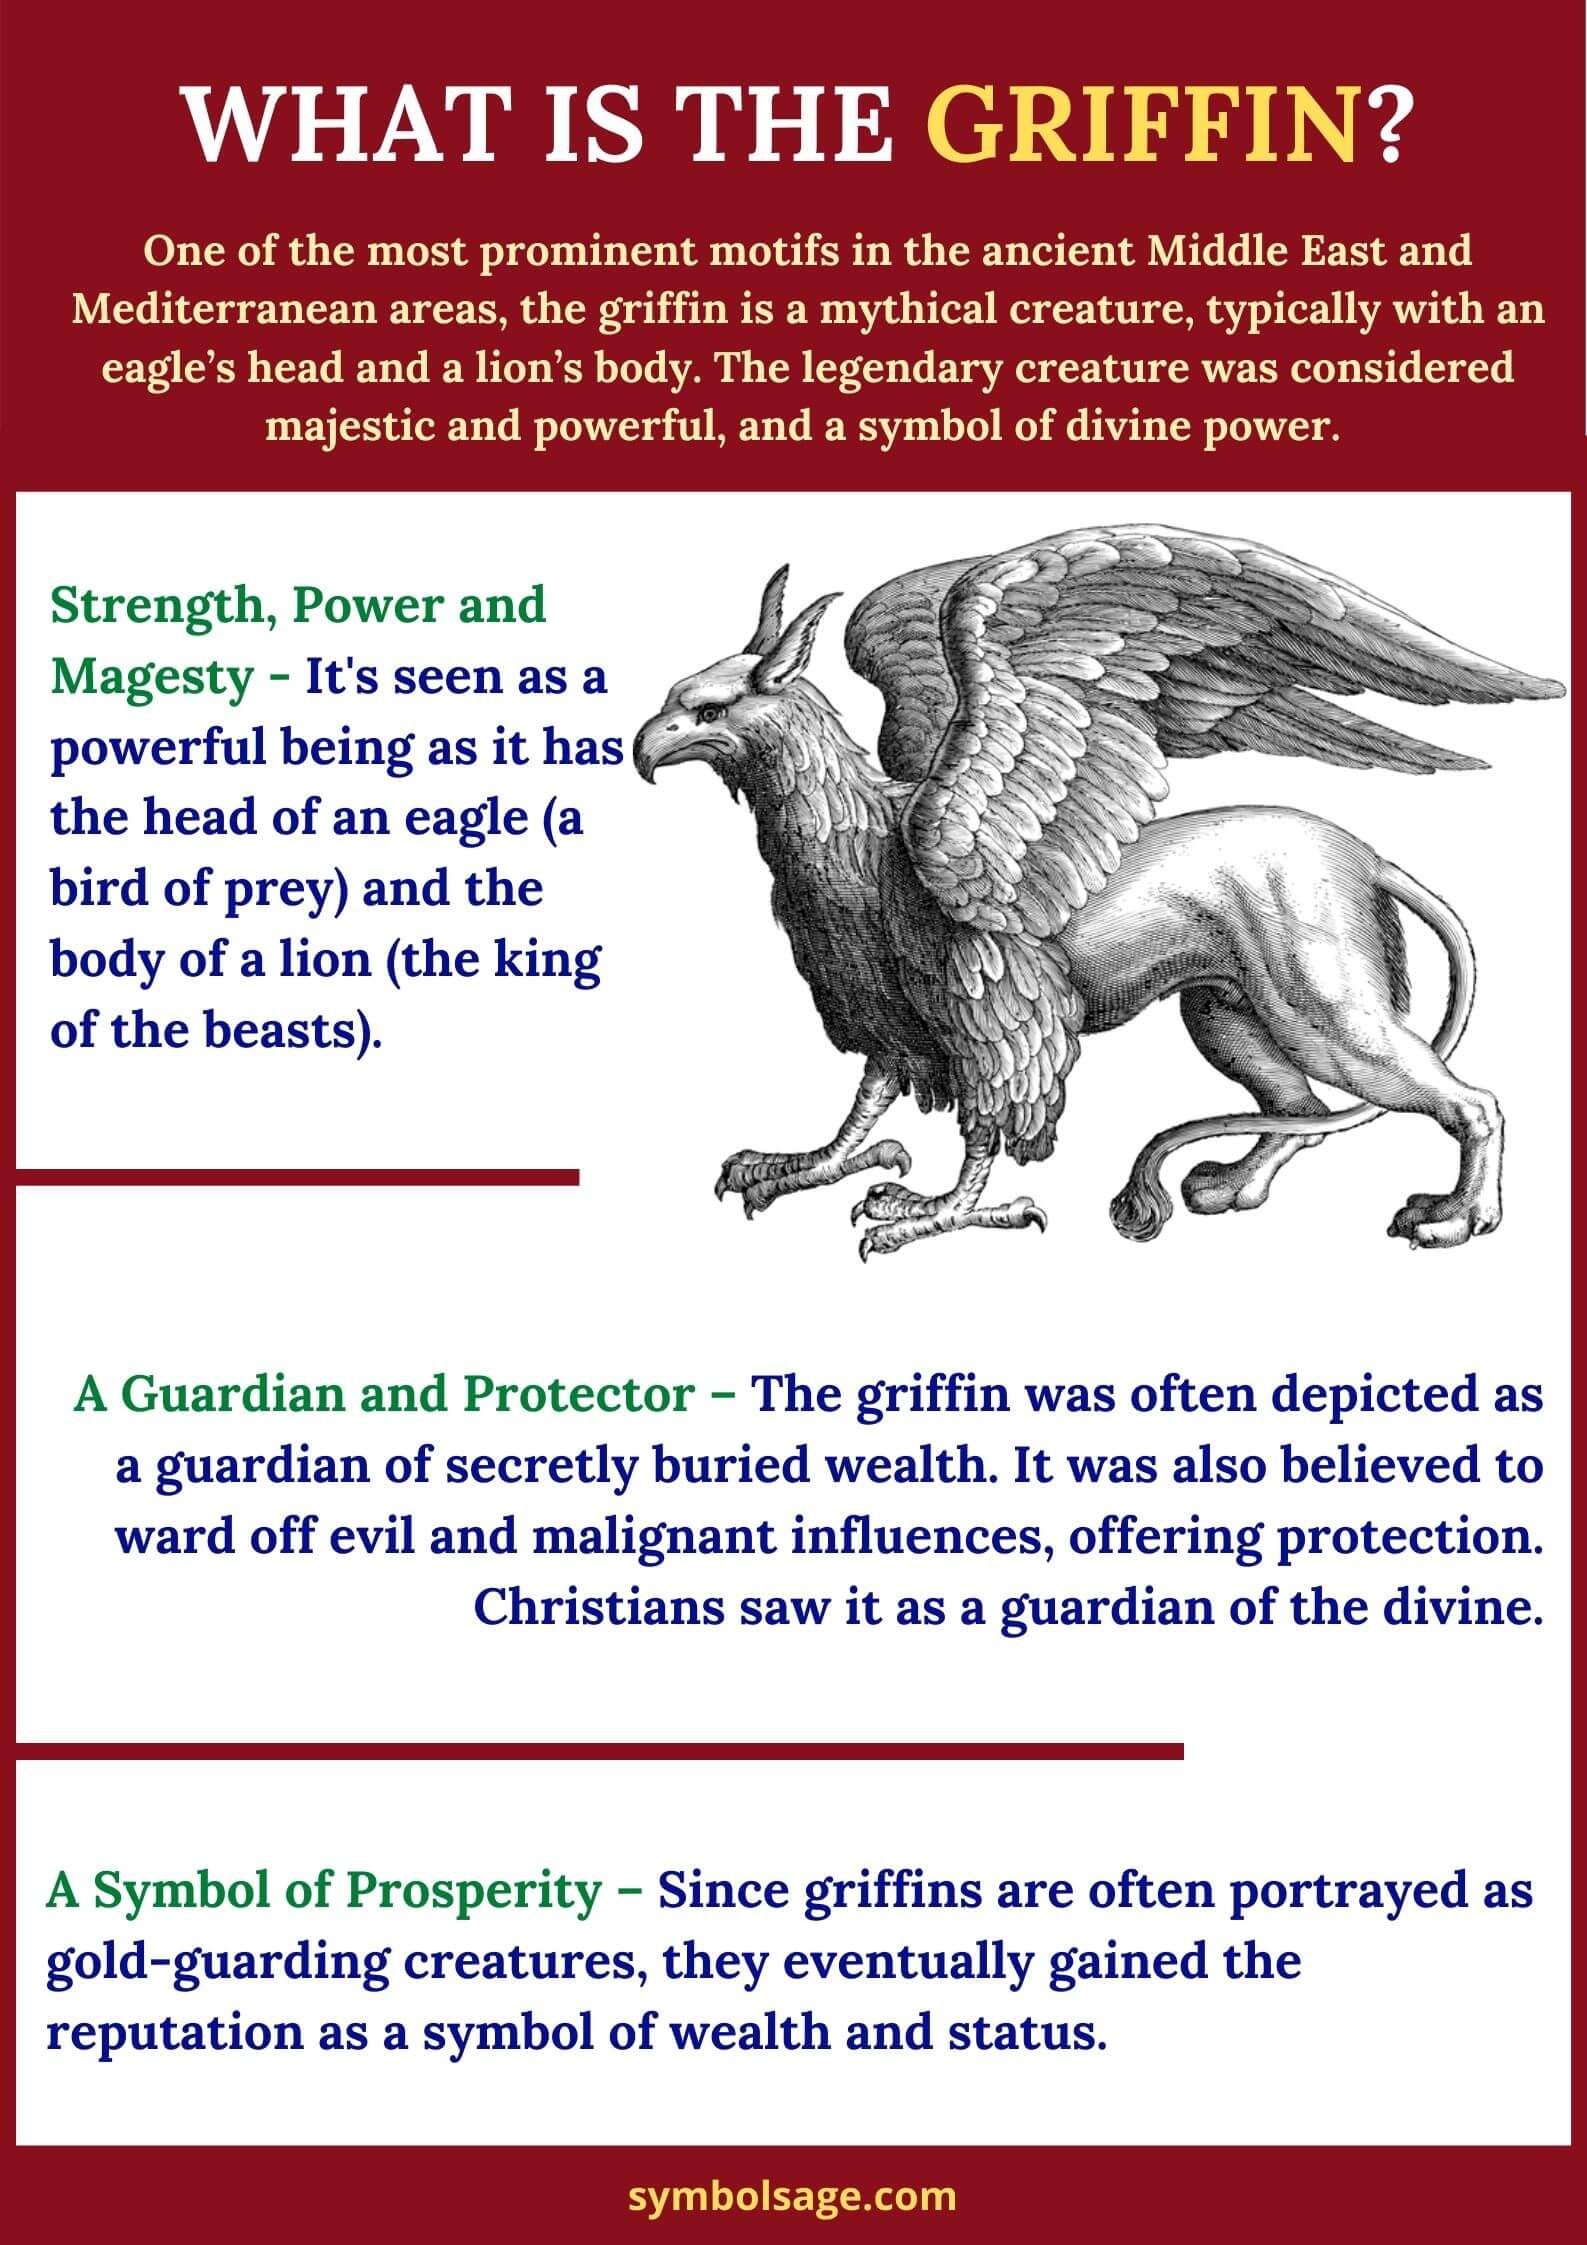 Symbolism of the griffin